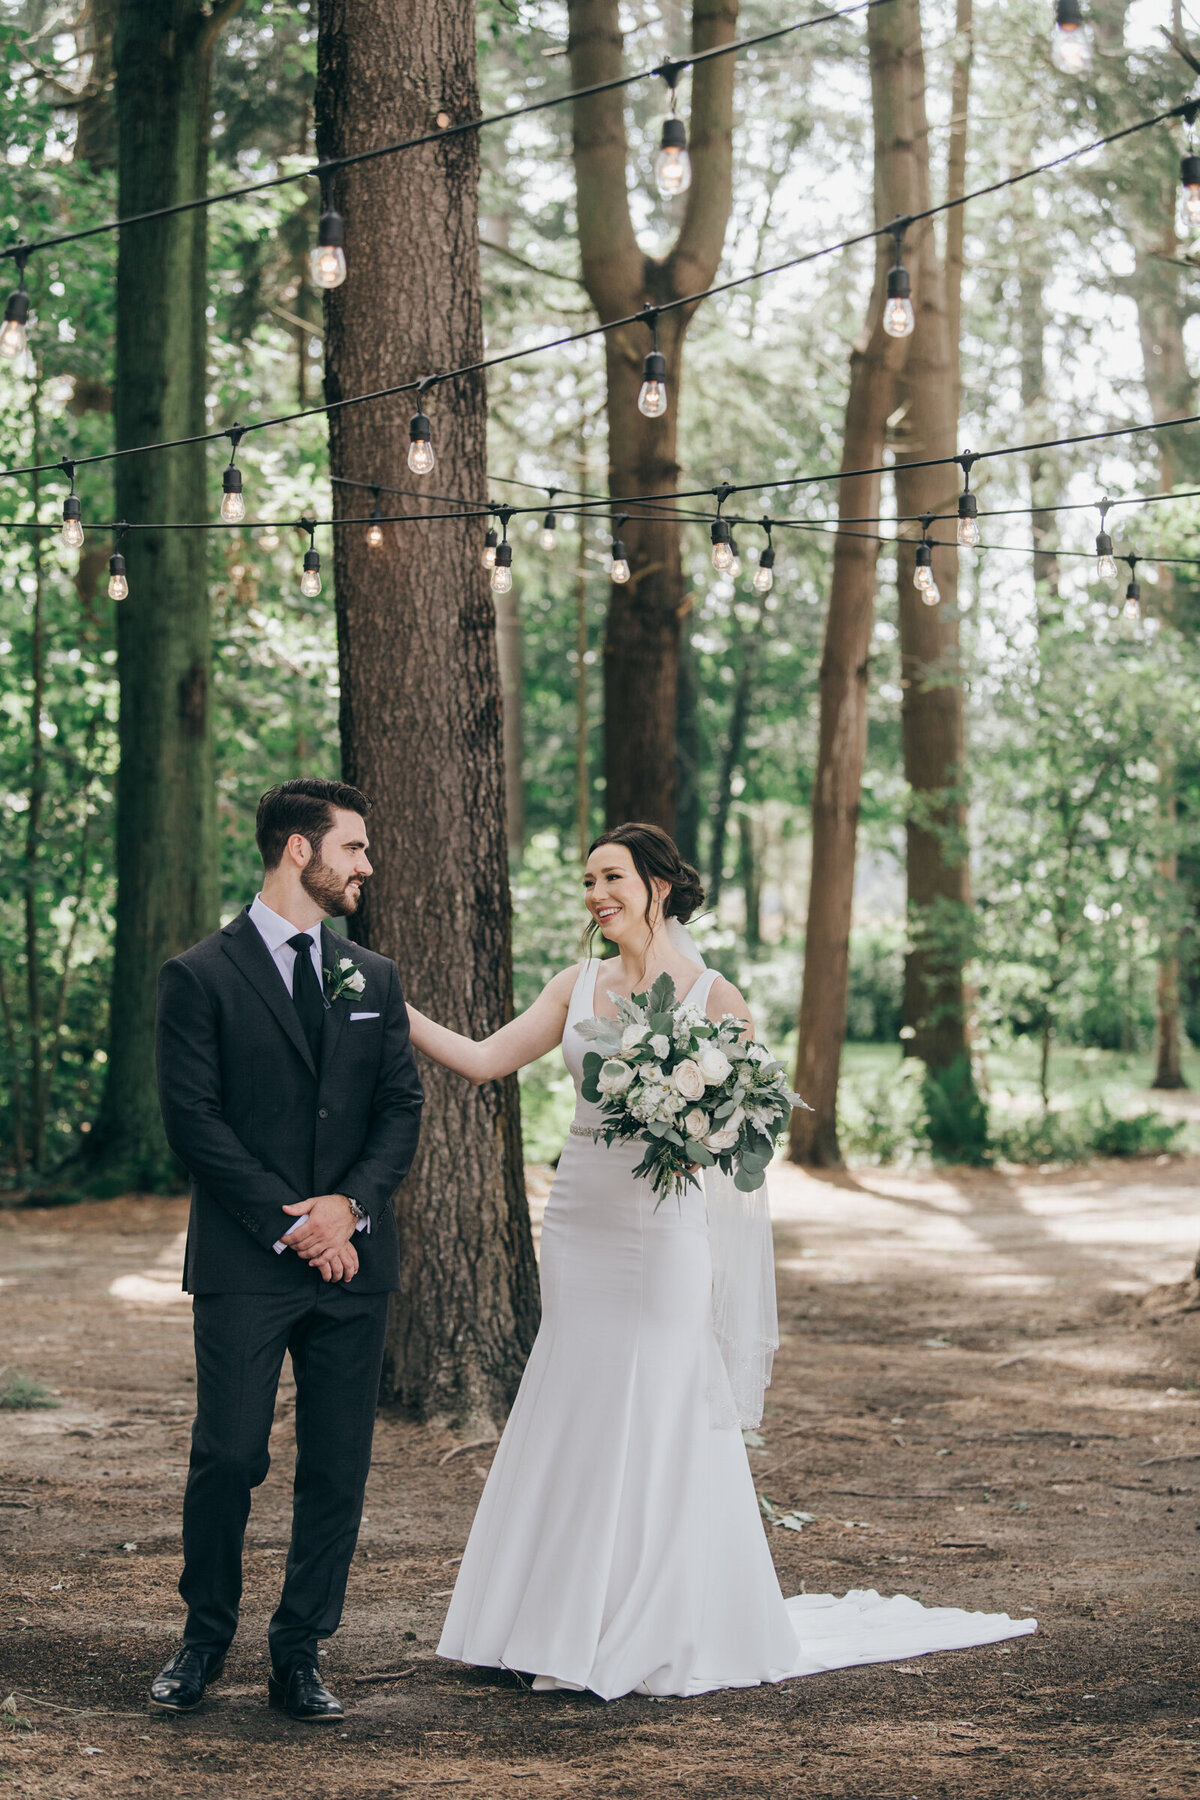 A bride walking up to her groom for a romantic first look in an enchanted forest